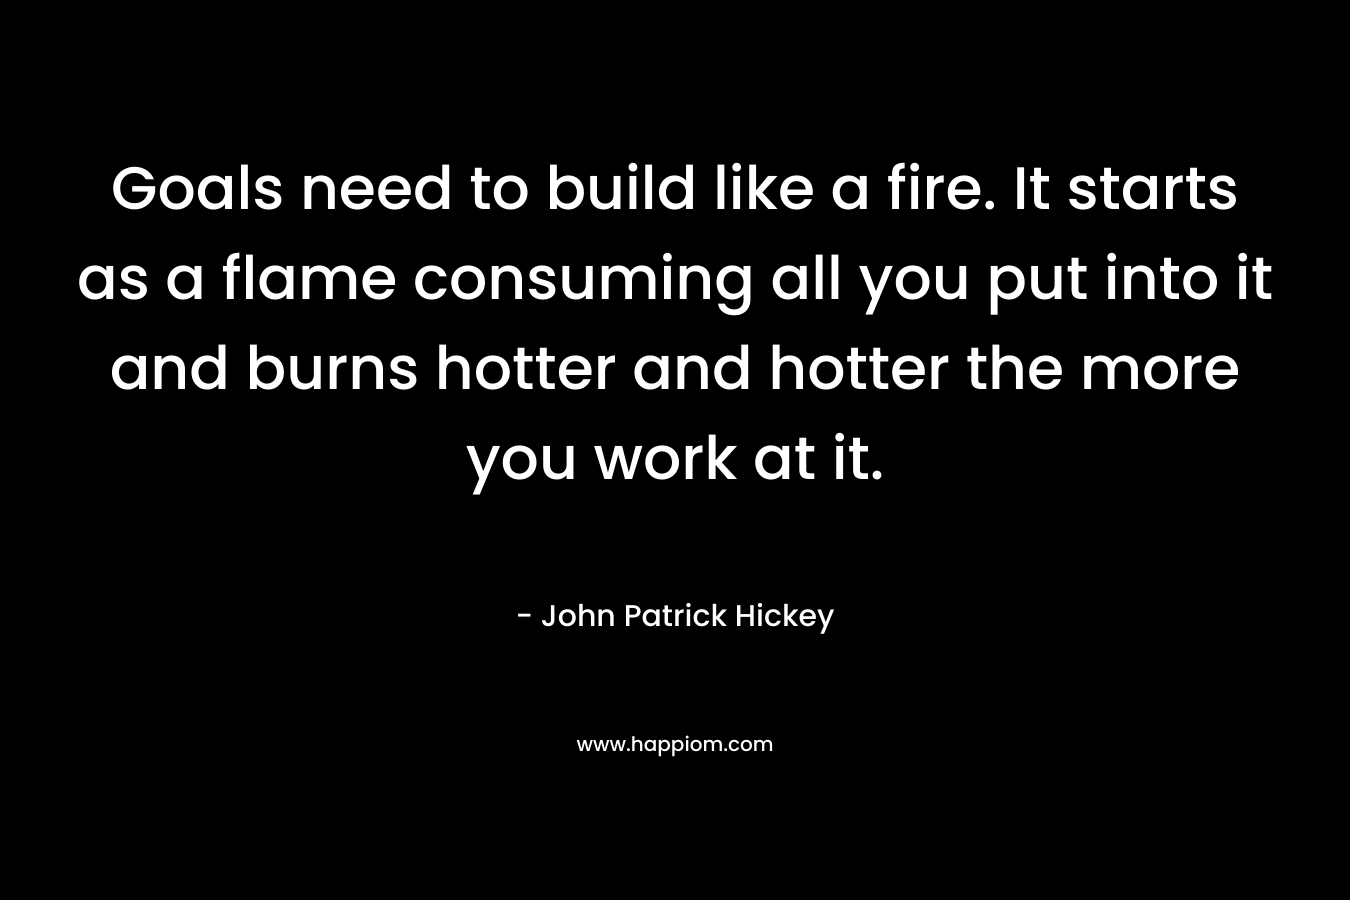 Goals need to build like a fire. It starts as a flame consuming all you put into it and burns hotter and hotter the more you work at it.